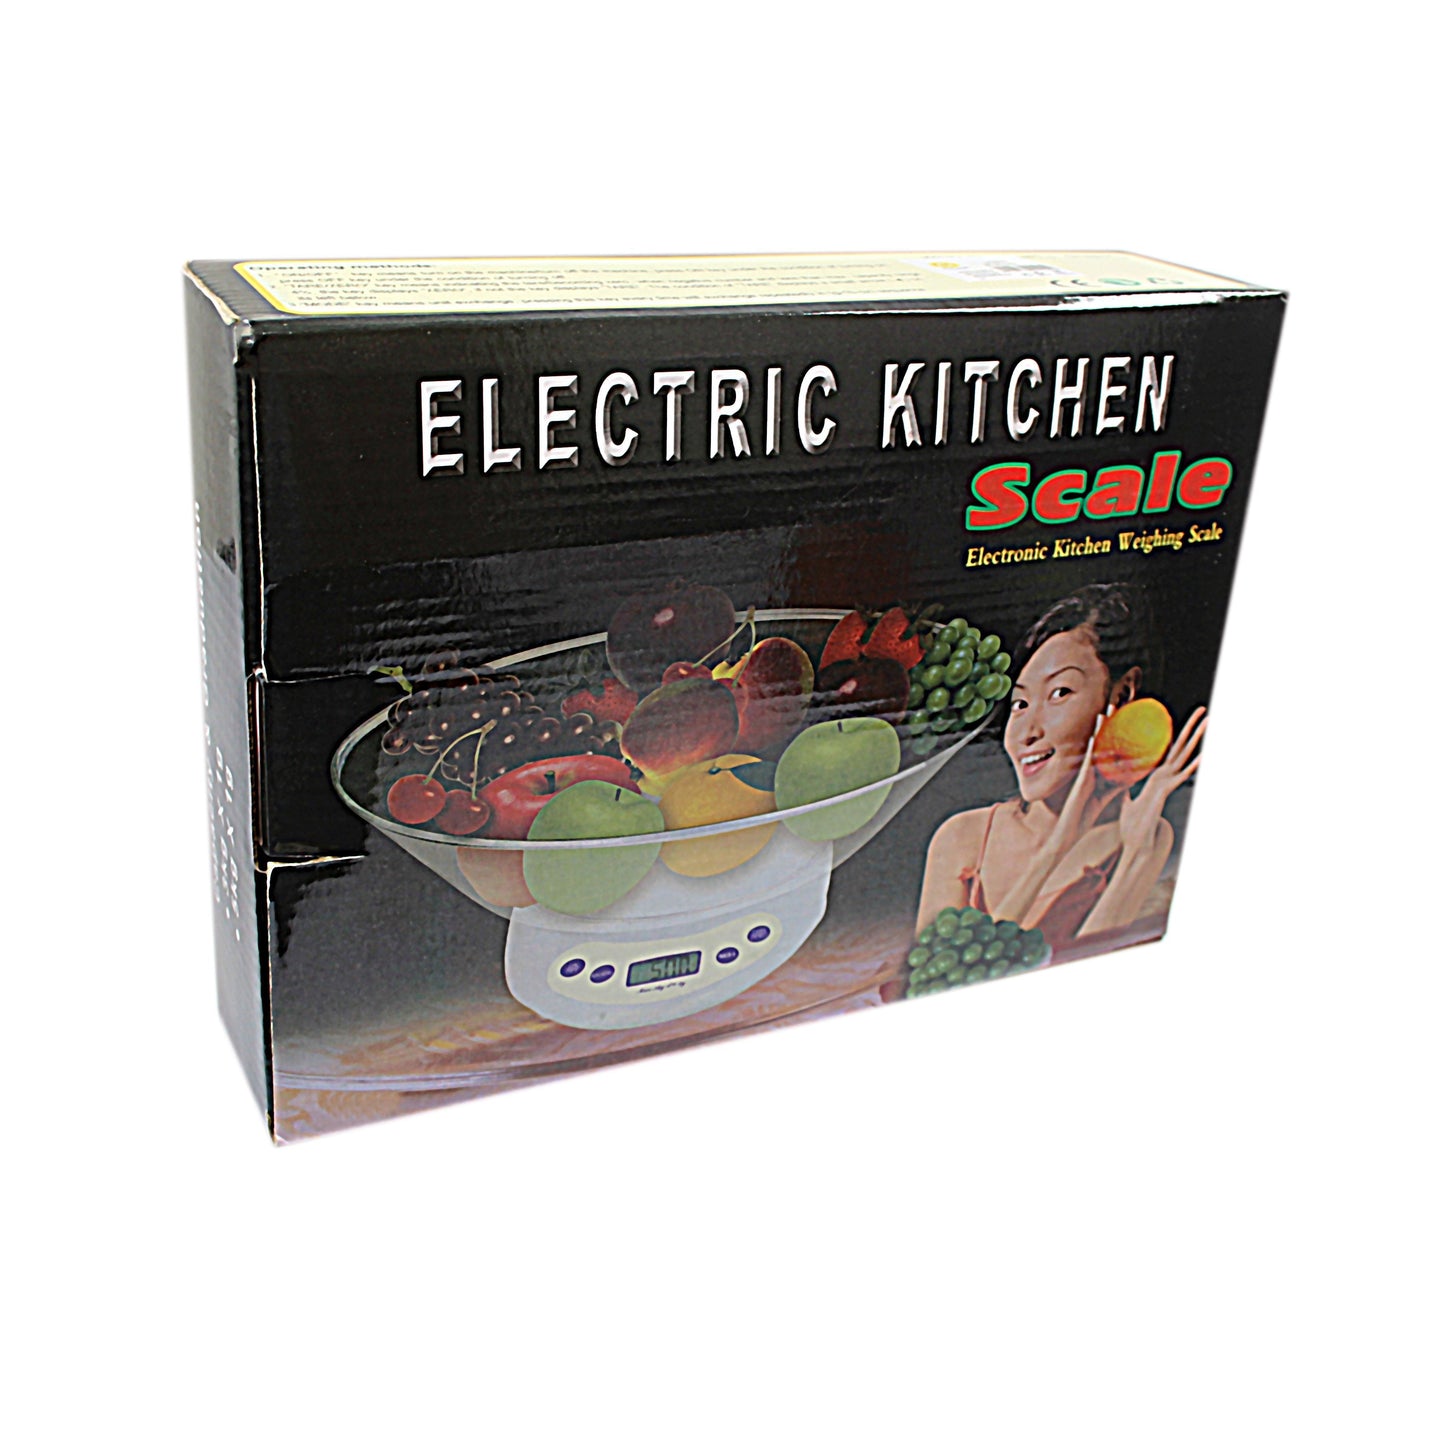 Electronic Kitchen Weighing Scale 00105 (Parcel Rate)